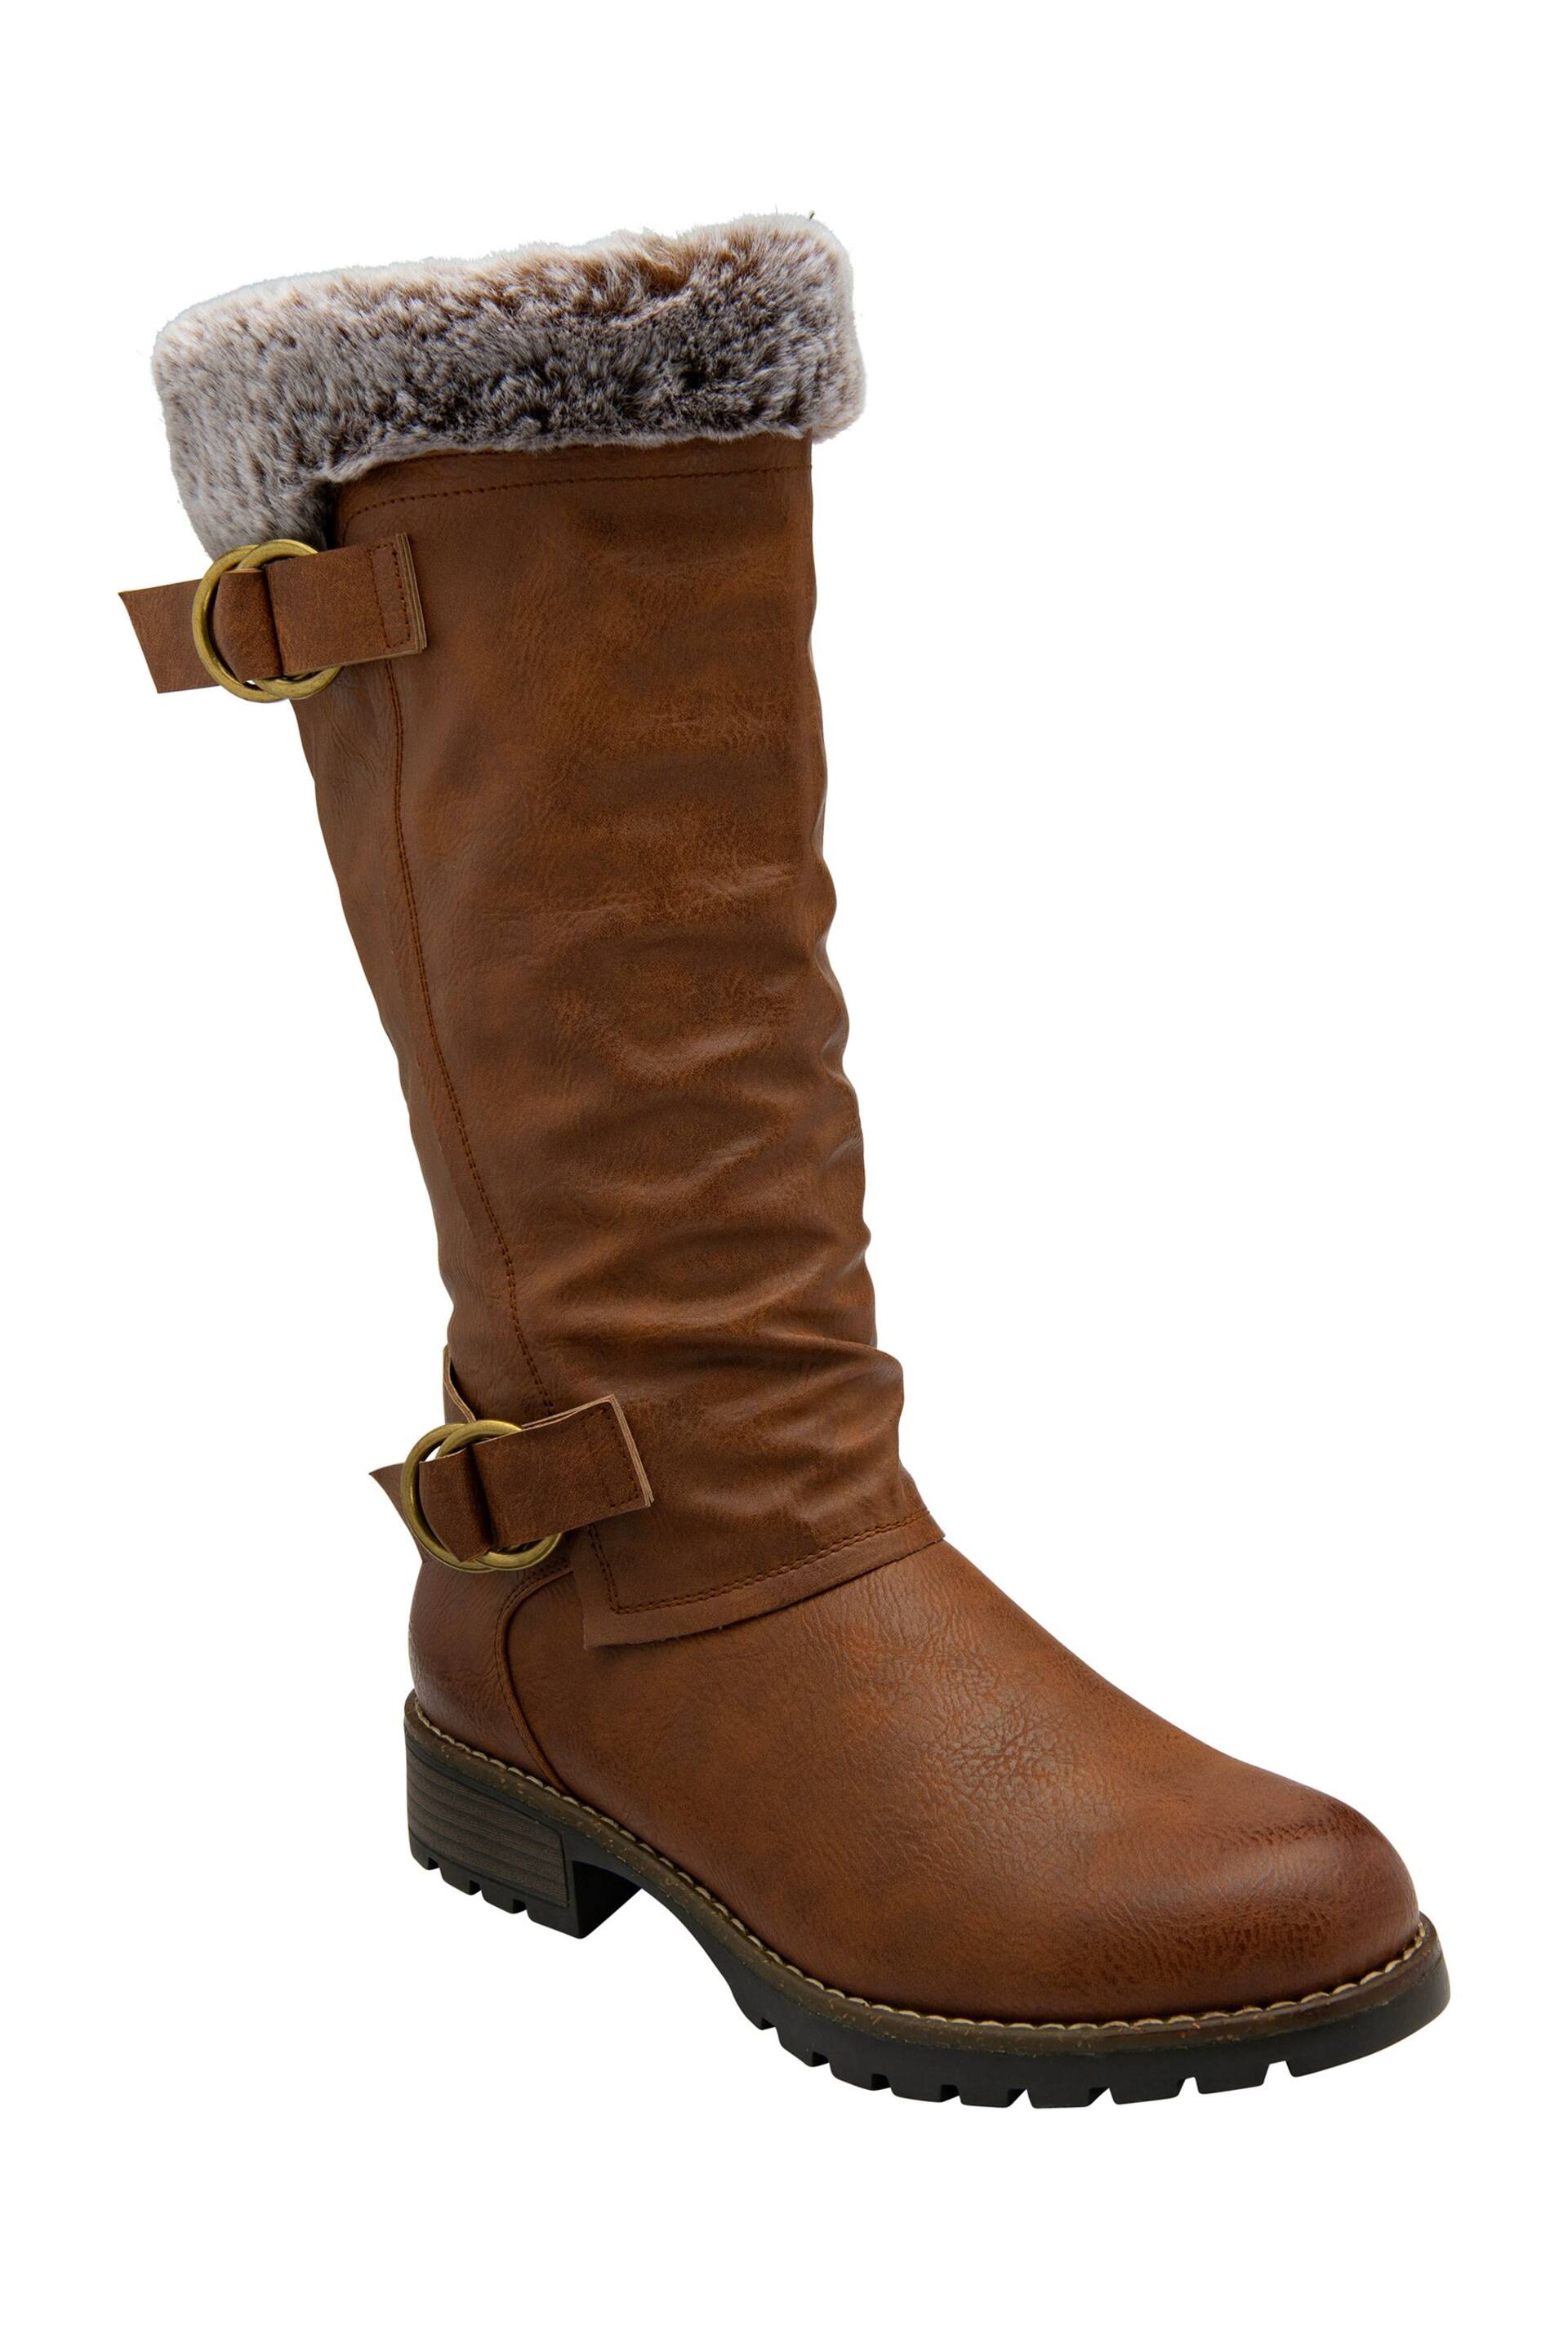 Lotus Brown Knee High Boots - Image 1 of 4